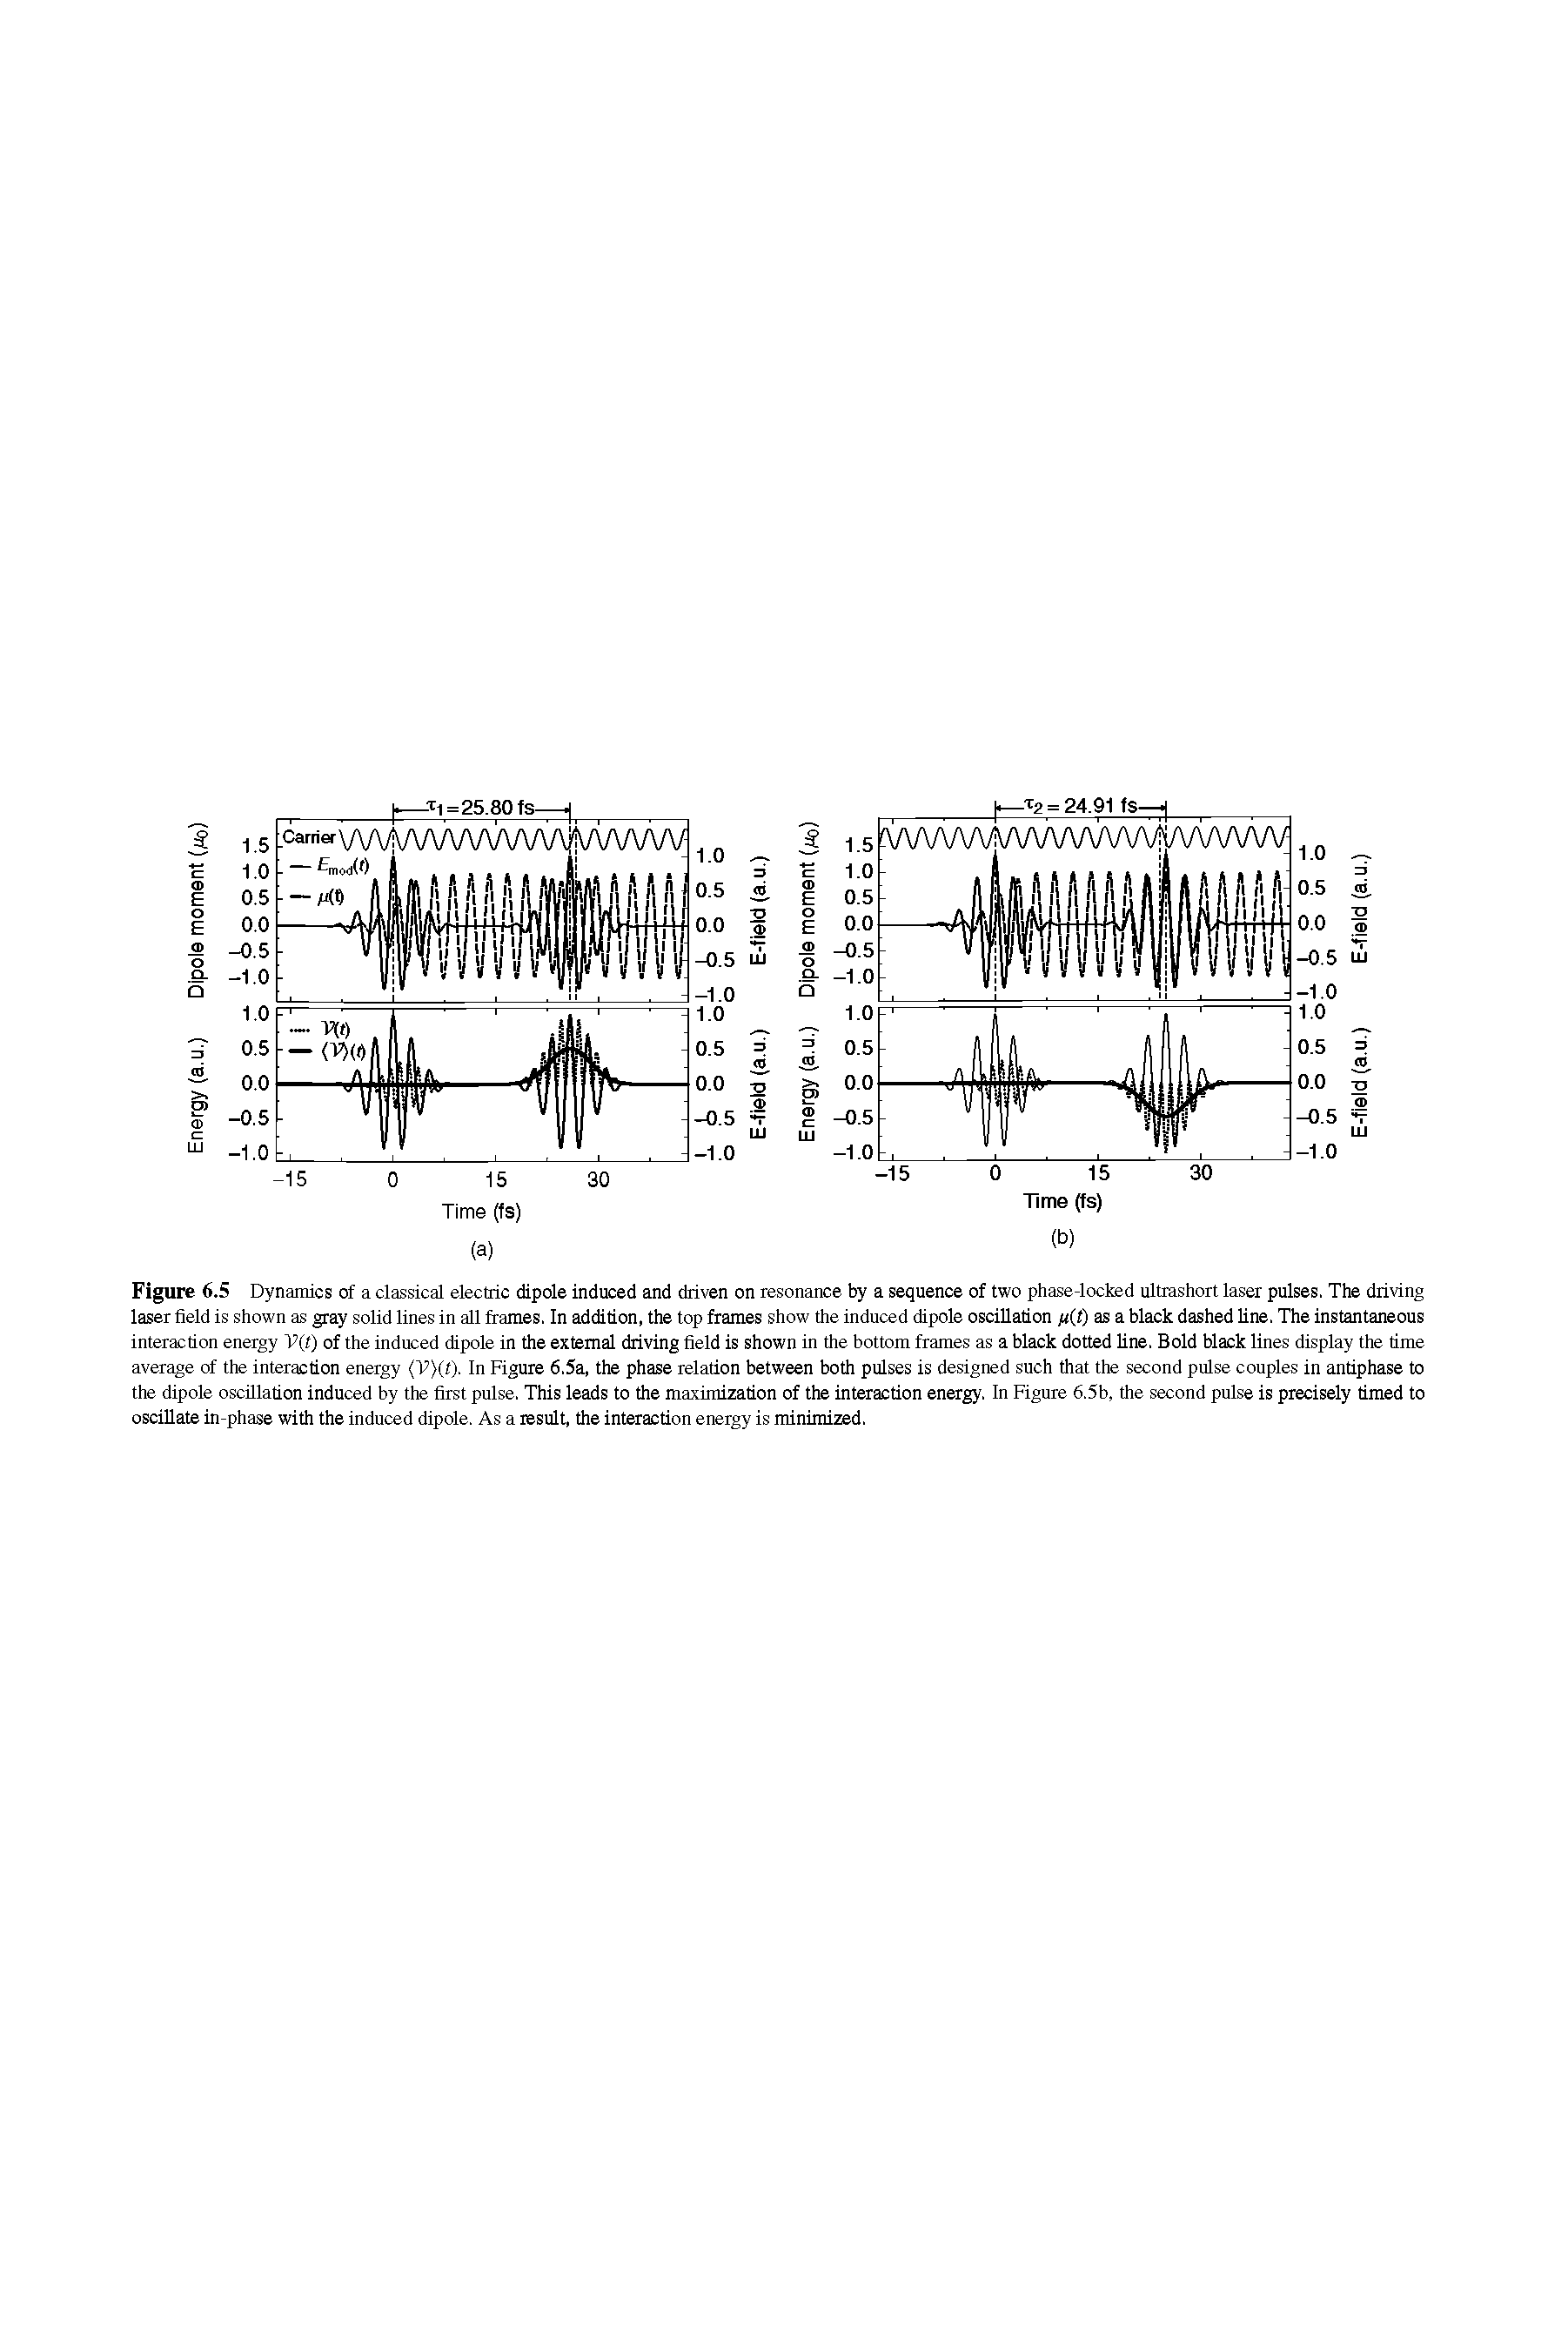 Figure 6.5 Dynamics of a classical electric dipole induced and driven on resonance by a sequence of two phase-locked ultrashort laser pulses, The driving laser field is shown as gray solid lines in all frames, In addition, the top frames show the induced dipole oscillation as a black dashed line. The instantaneous interaction energy V(t) of the induced dipole in the external driving field is shown in the bottom frames as a black dotted line. Bold black lines display the time average of the interaction energy In Figure 6,5a, the phase relation between both pulses is designed such that the second pulse couples in antiphase to...